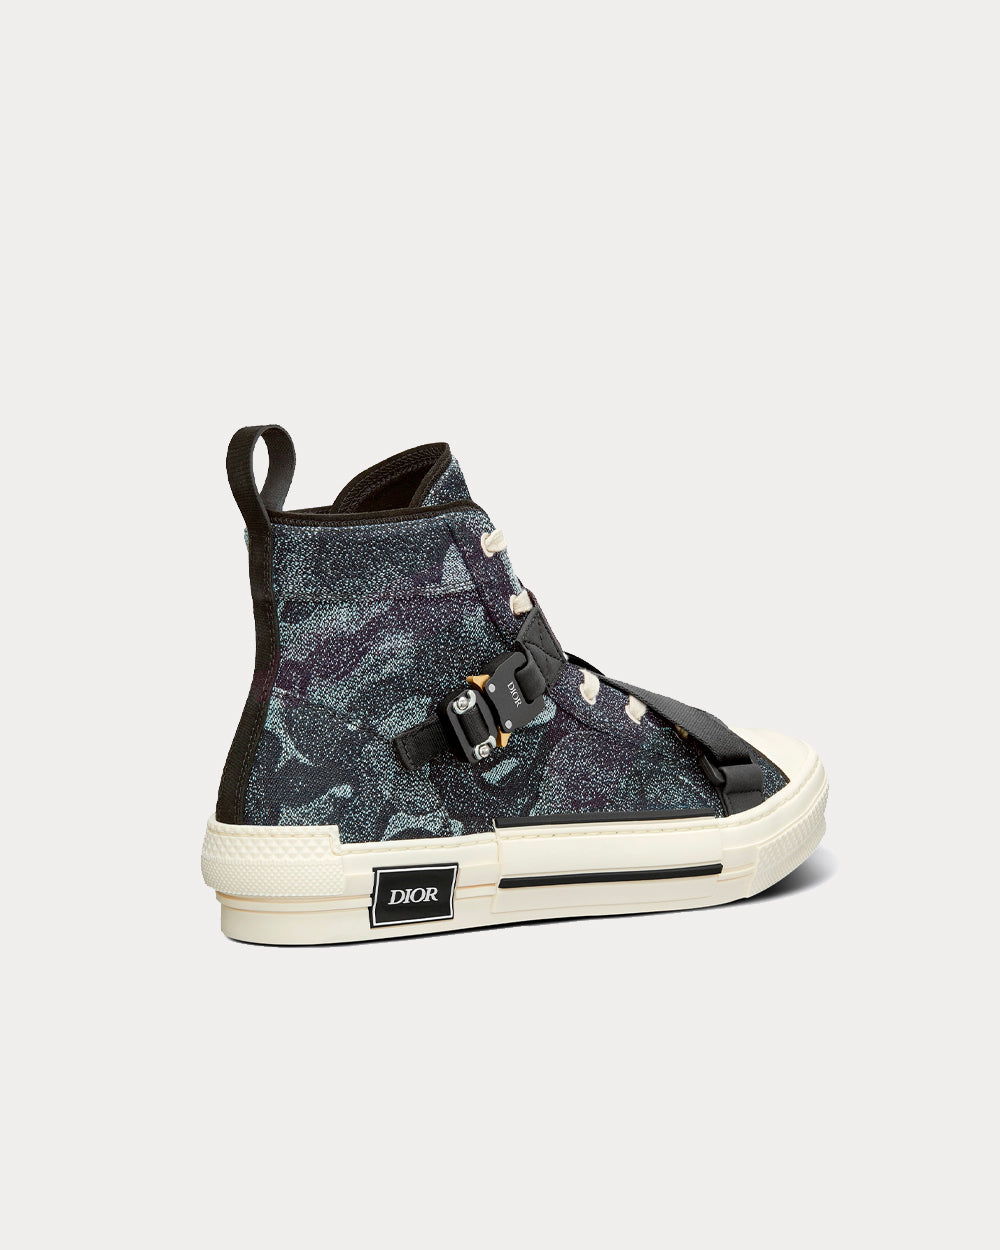 Dior x Peter Doig - B23 Denim Camouflage Jacquard High Top Sneakers